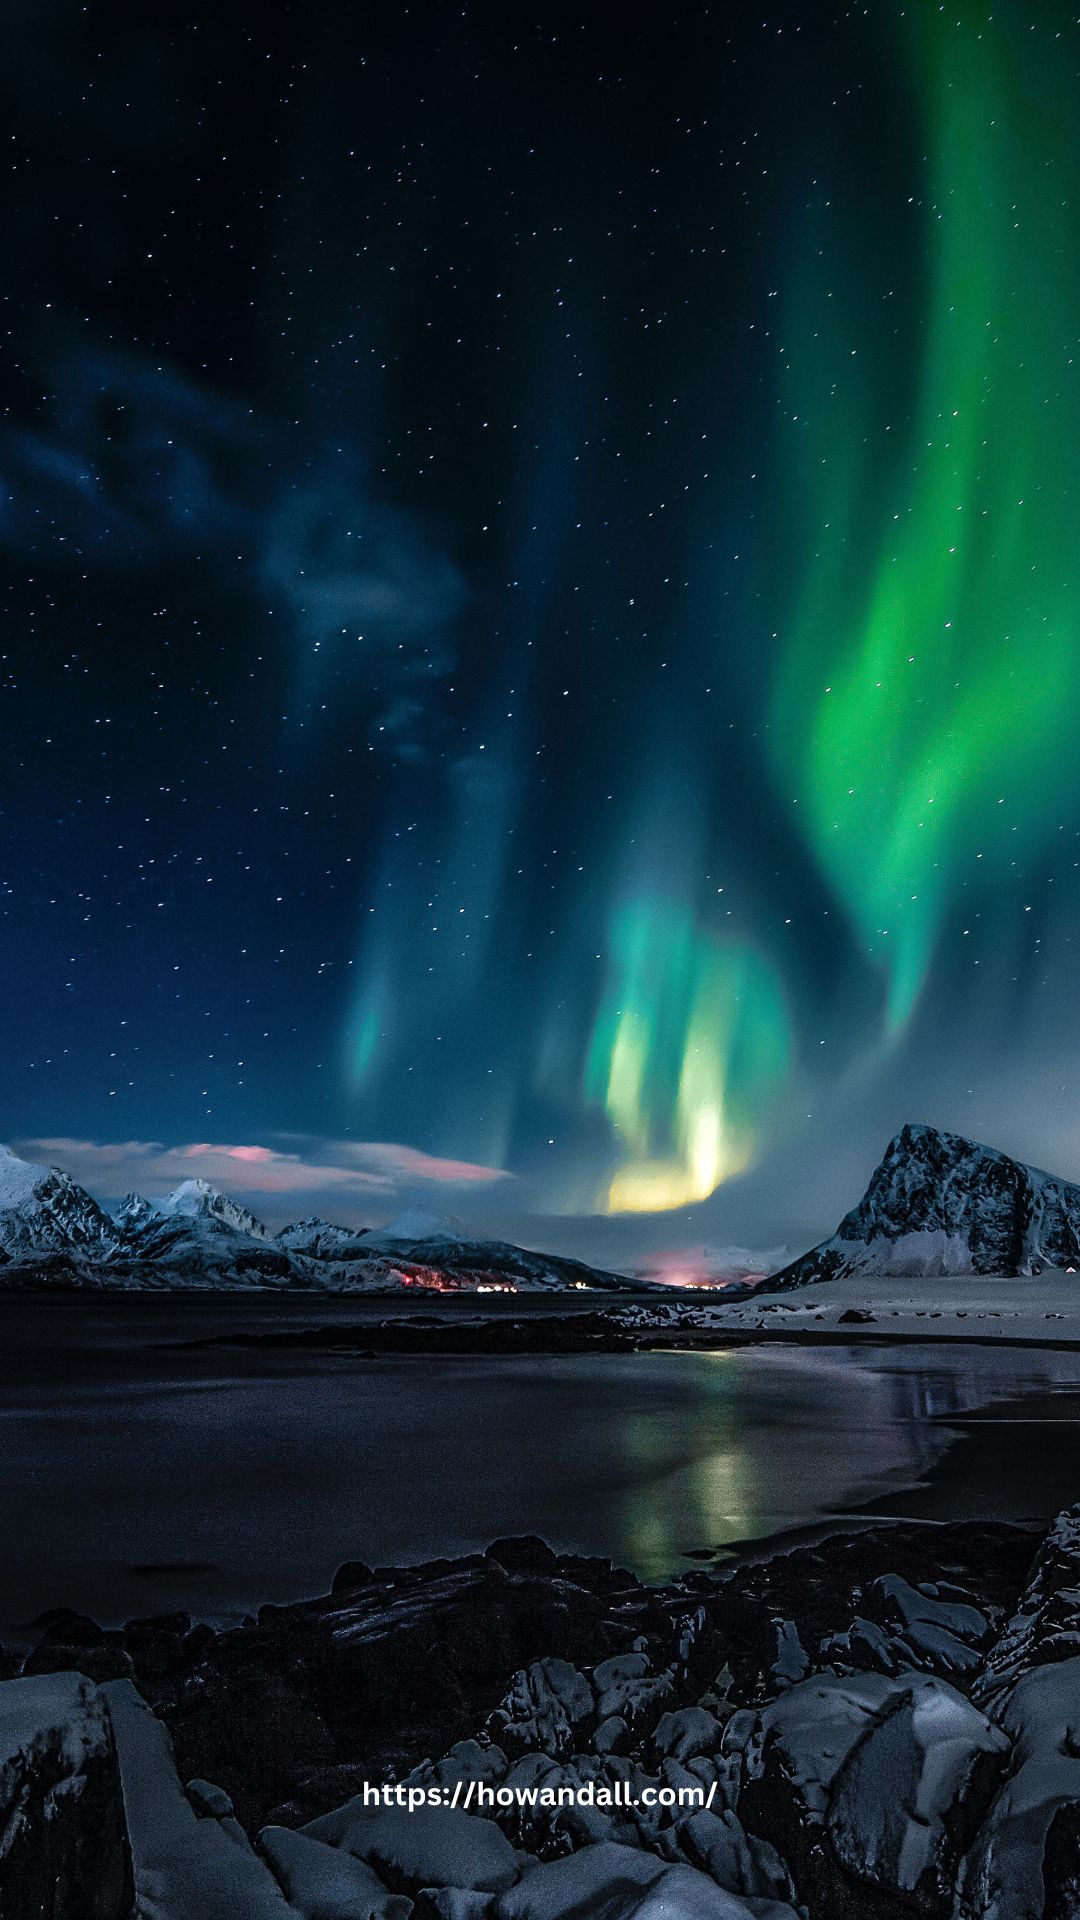 Majestic Aurora: Northern Lights Light Up the Sky Amidst Intense Geomagnetic Turbulence.